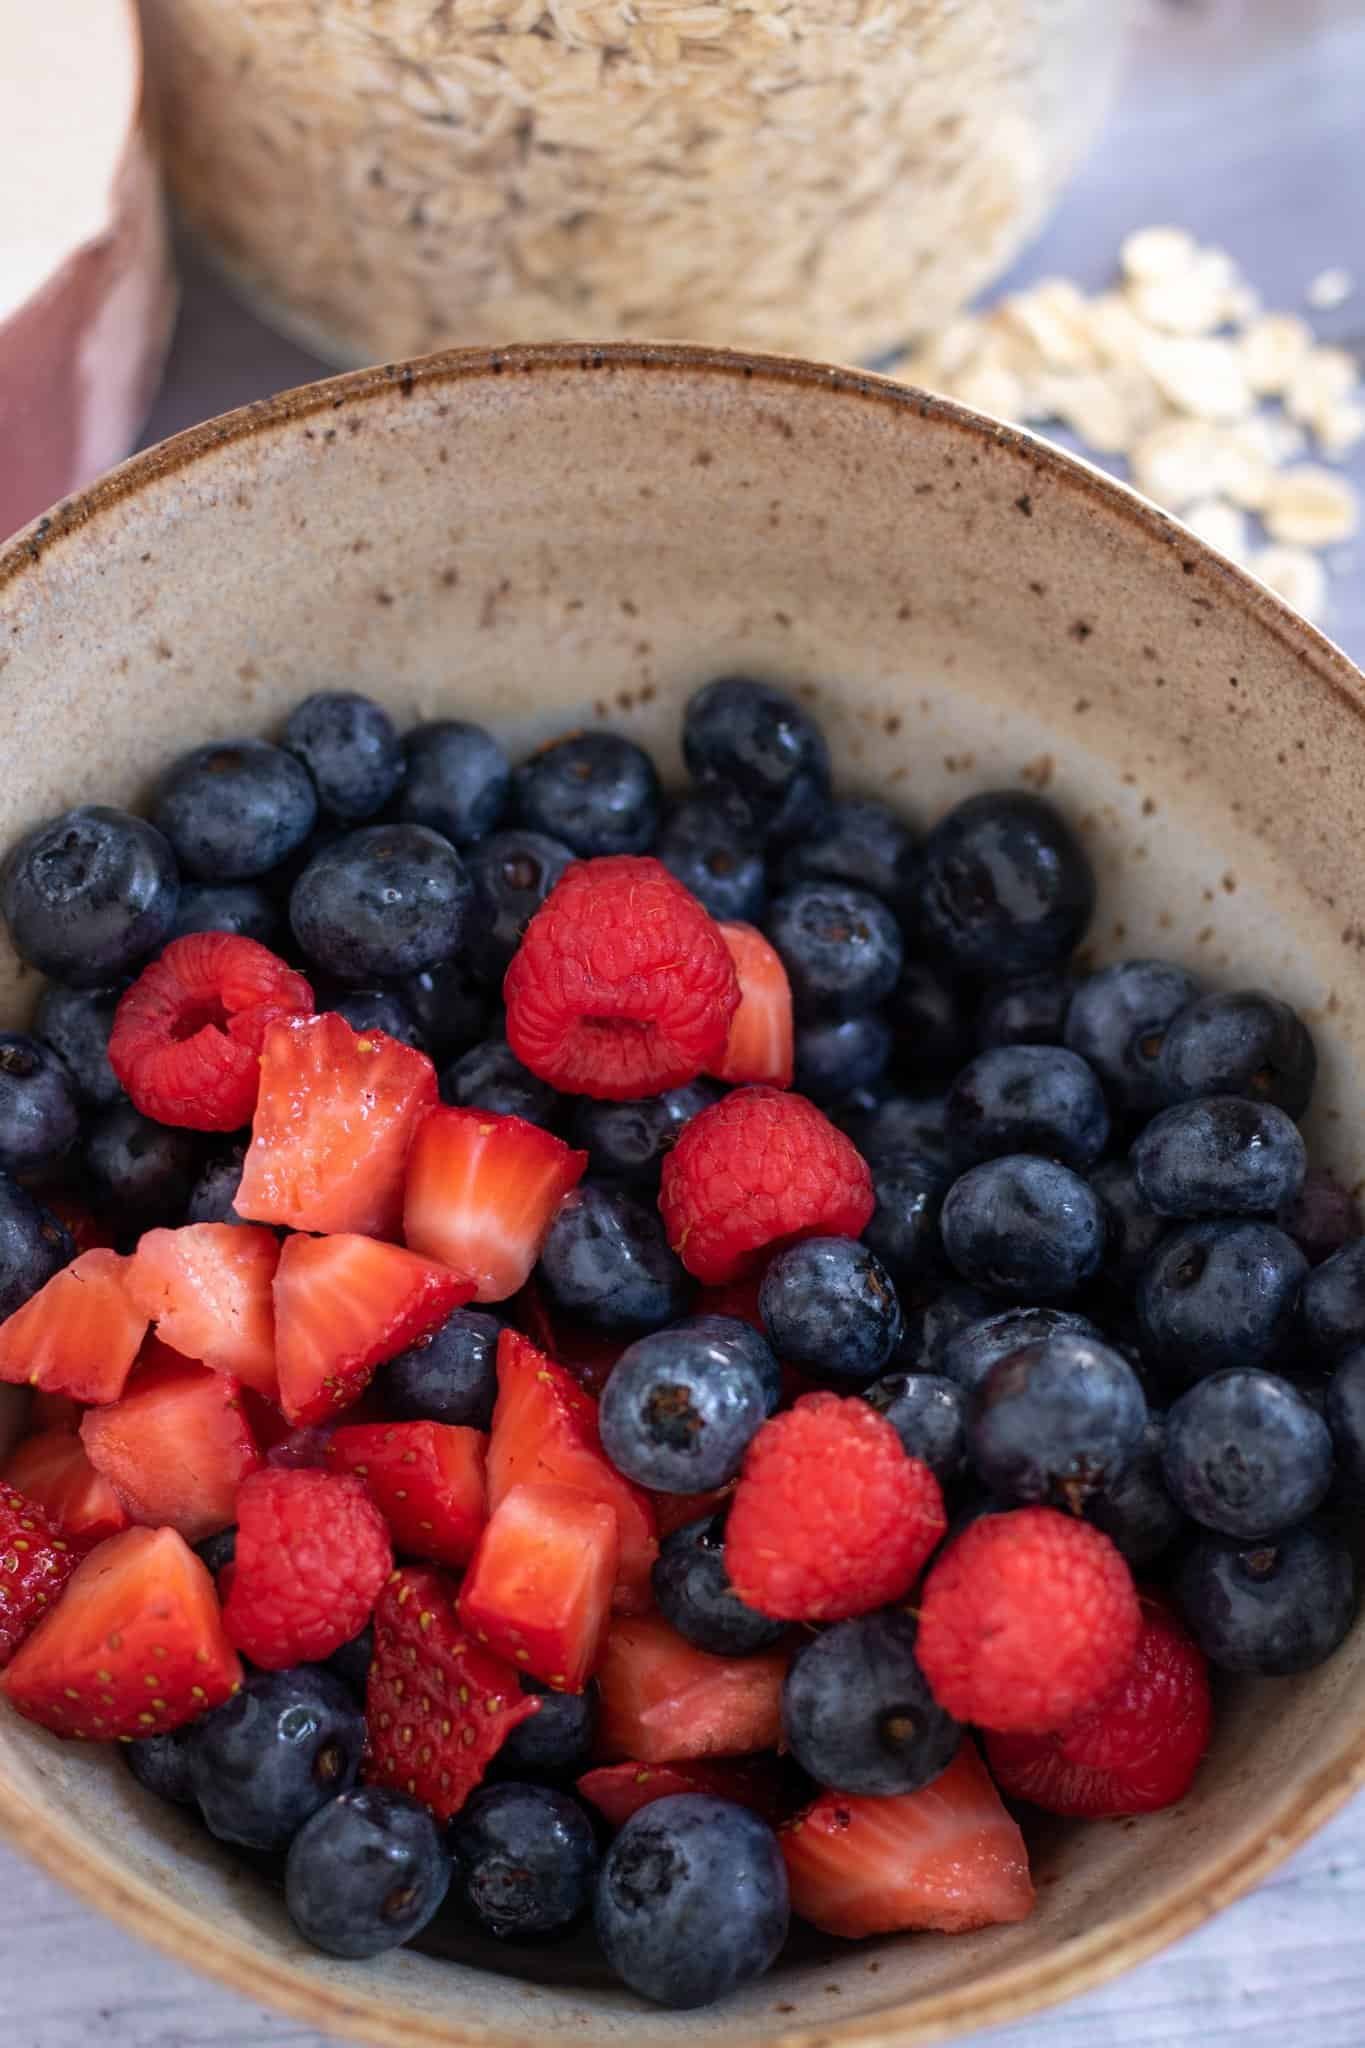 A brown speckled bowl filled with fresh blueberries, raspberries, and strawberries. There's oats sprinkled in the background.